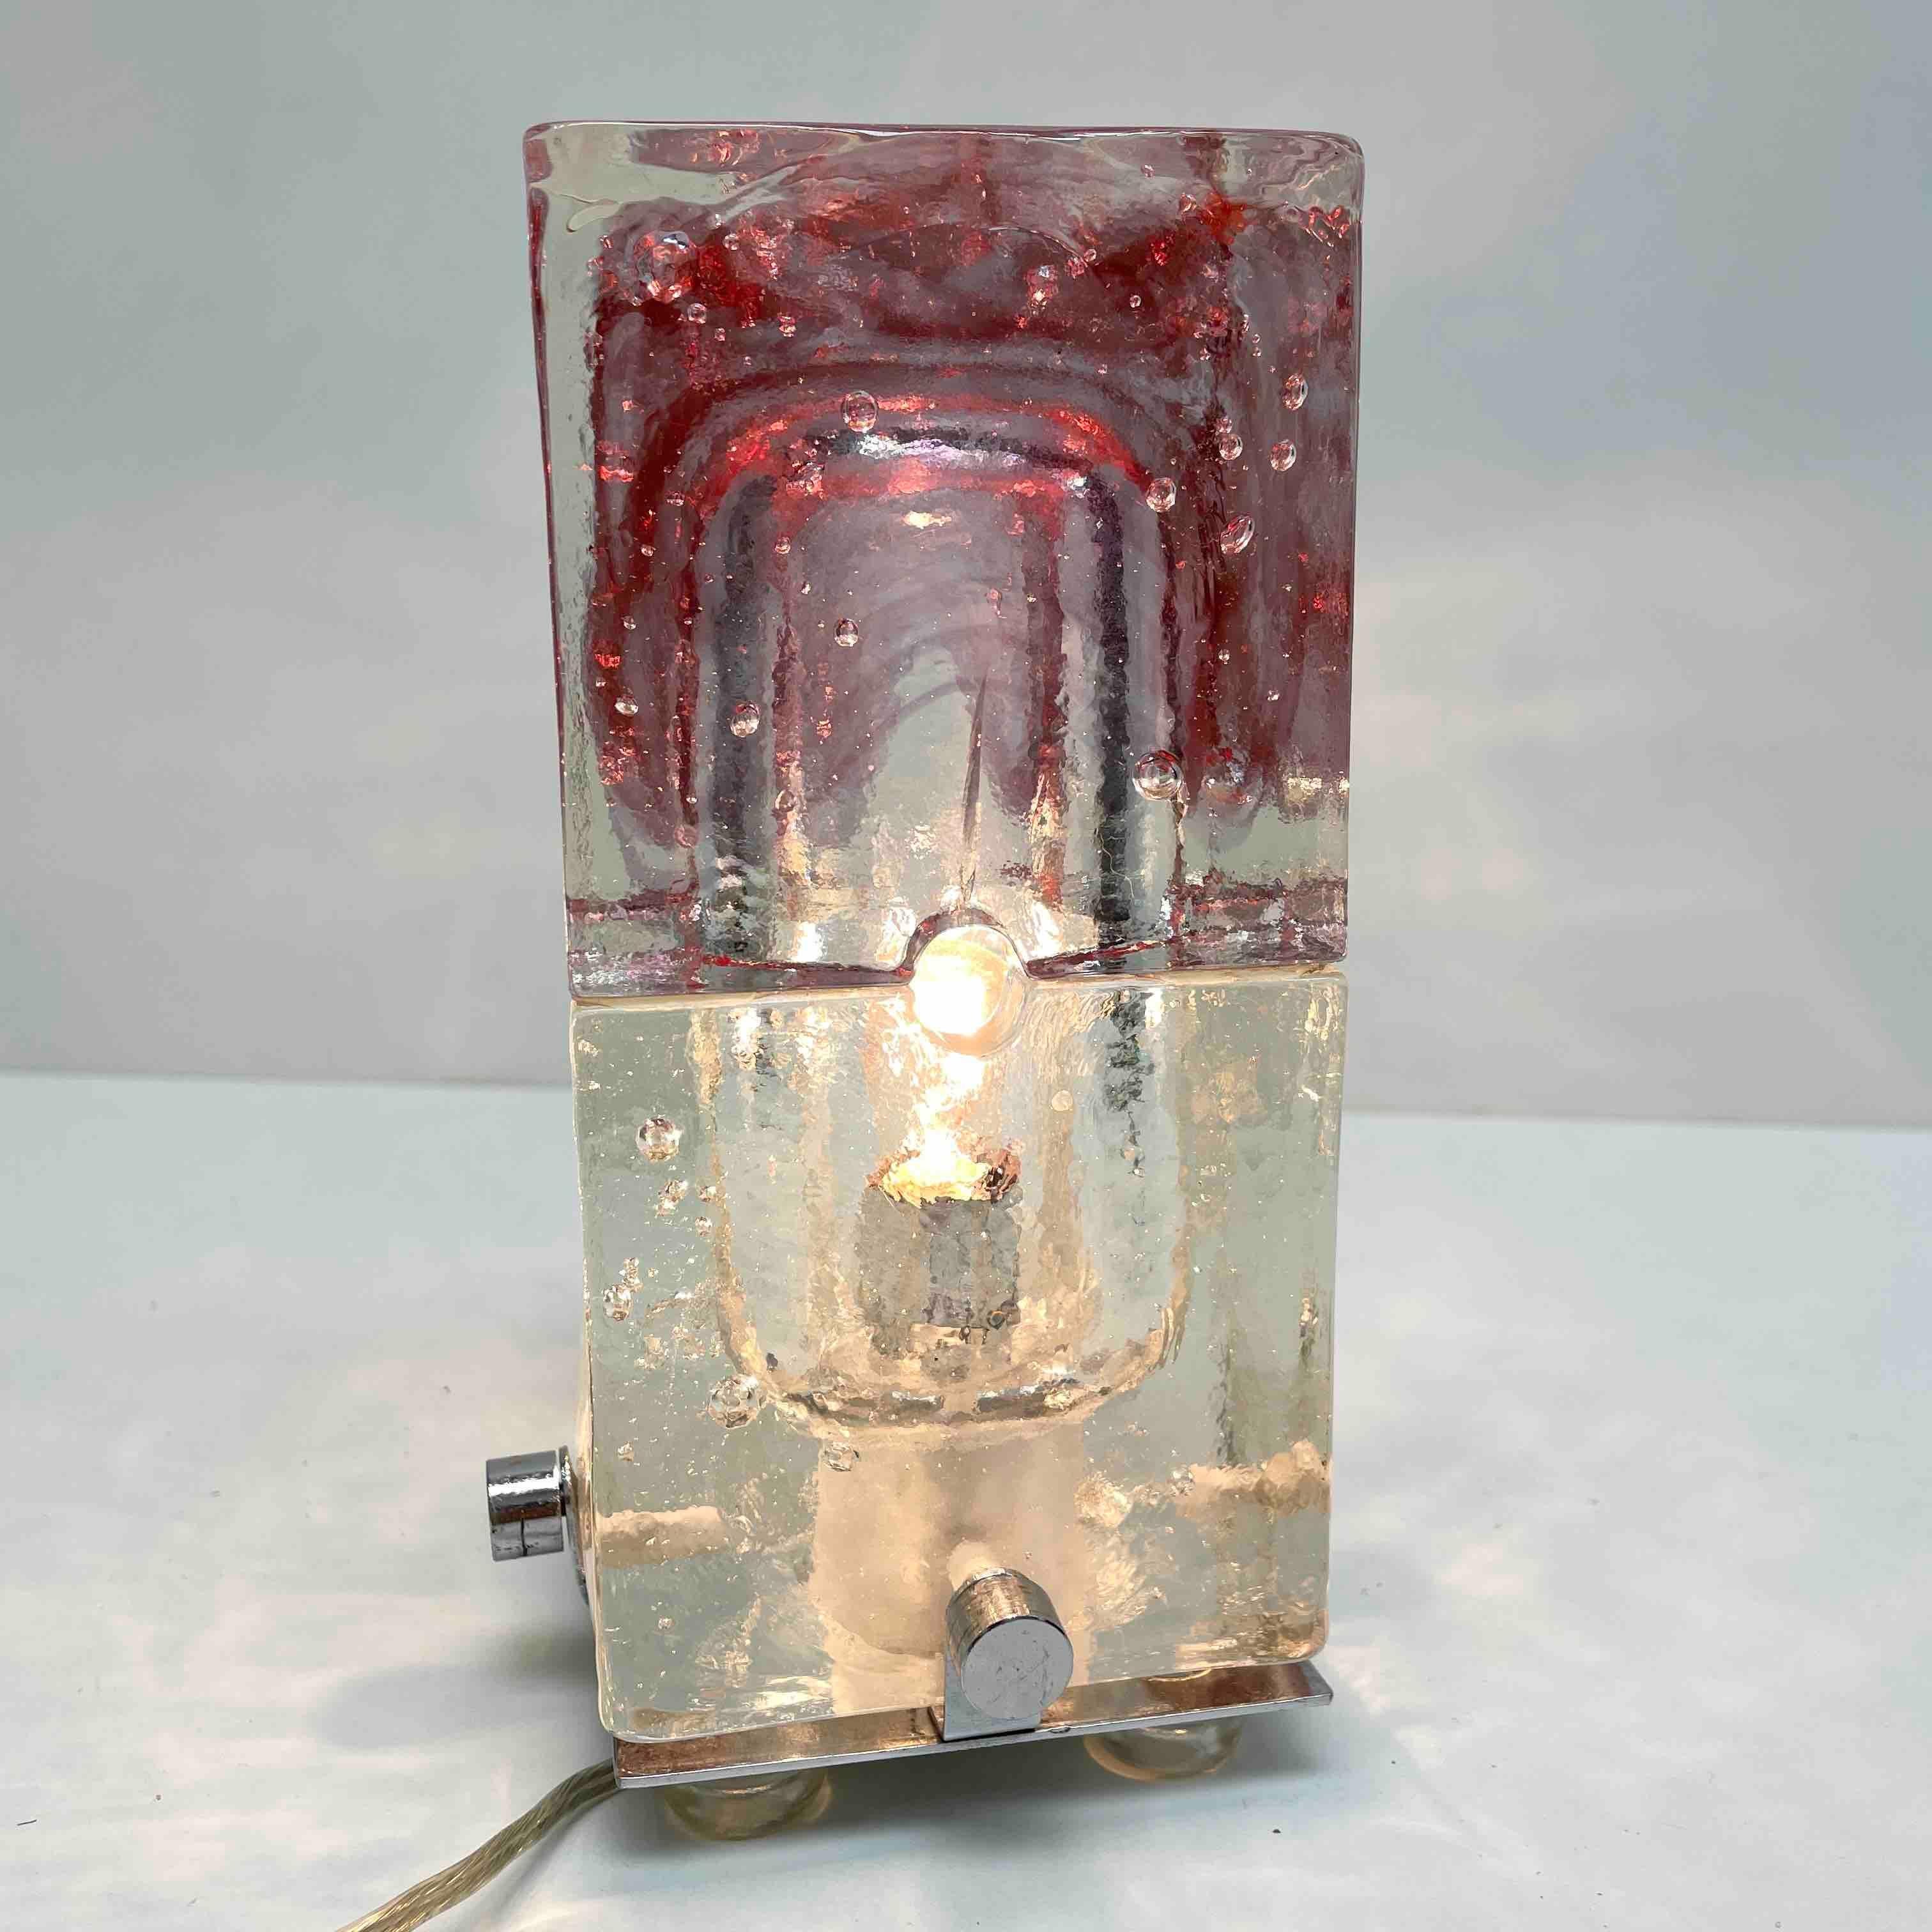 Beautiful ice block table lamp. Made of heavy glass and a chrome base, made in Murano Italy. The Fixture requires one European E14 / 110 Volt small bulb, up to 40 watts. A beautiful addition to any room.